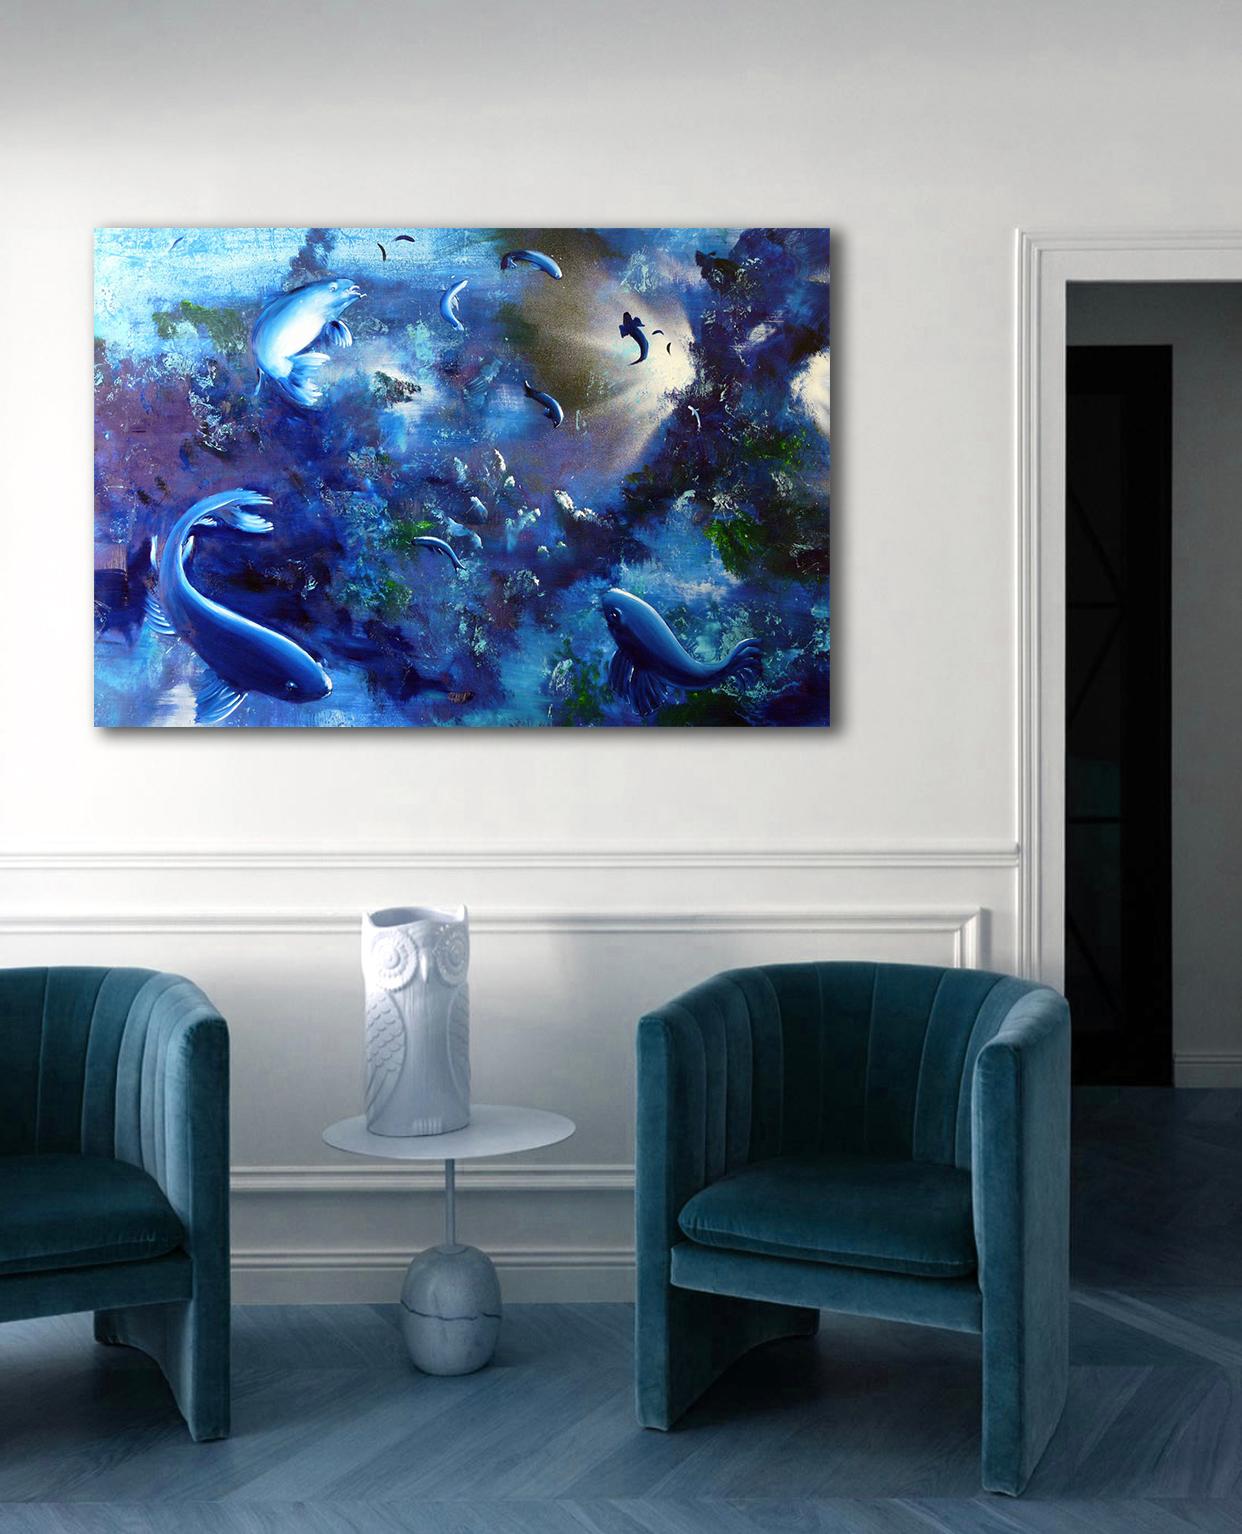 Leibniz Universe 1U - Contemporary and colorful underwater scene, Oil on canvas - Painting by Gian Marco Capraro